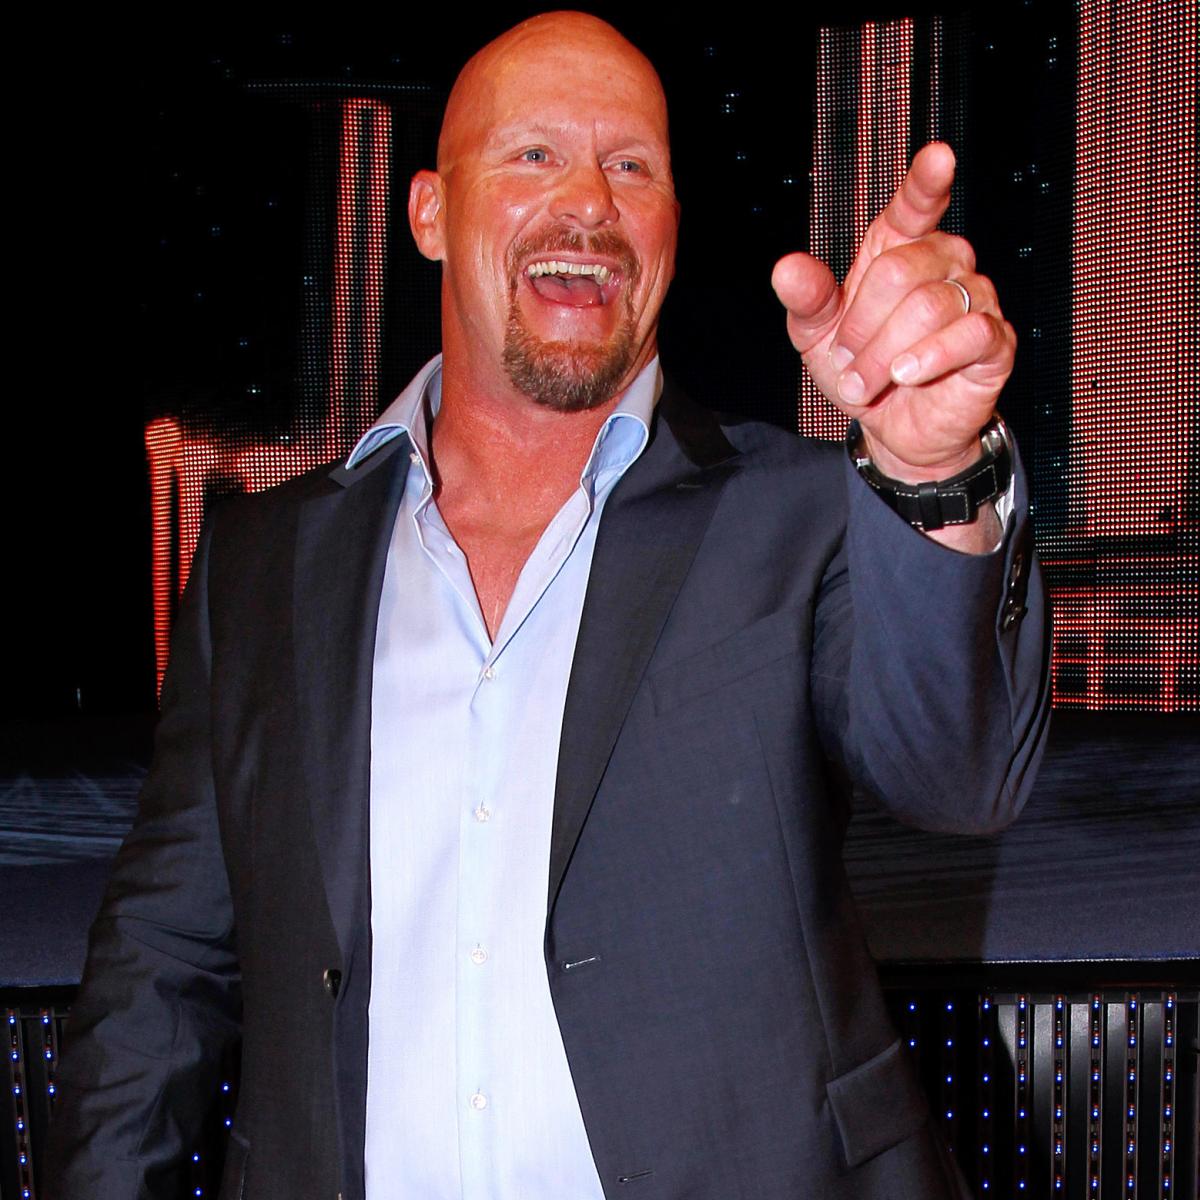 Wwe S Stone Cold Steve Austin Selling California Home For 3 6 Million Bleacher Report Latest News Videos And Highlights